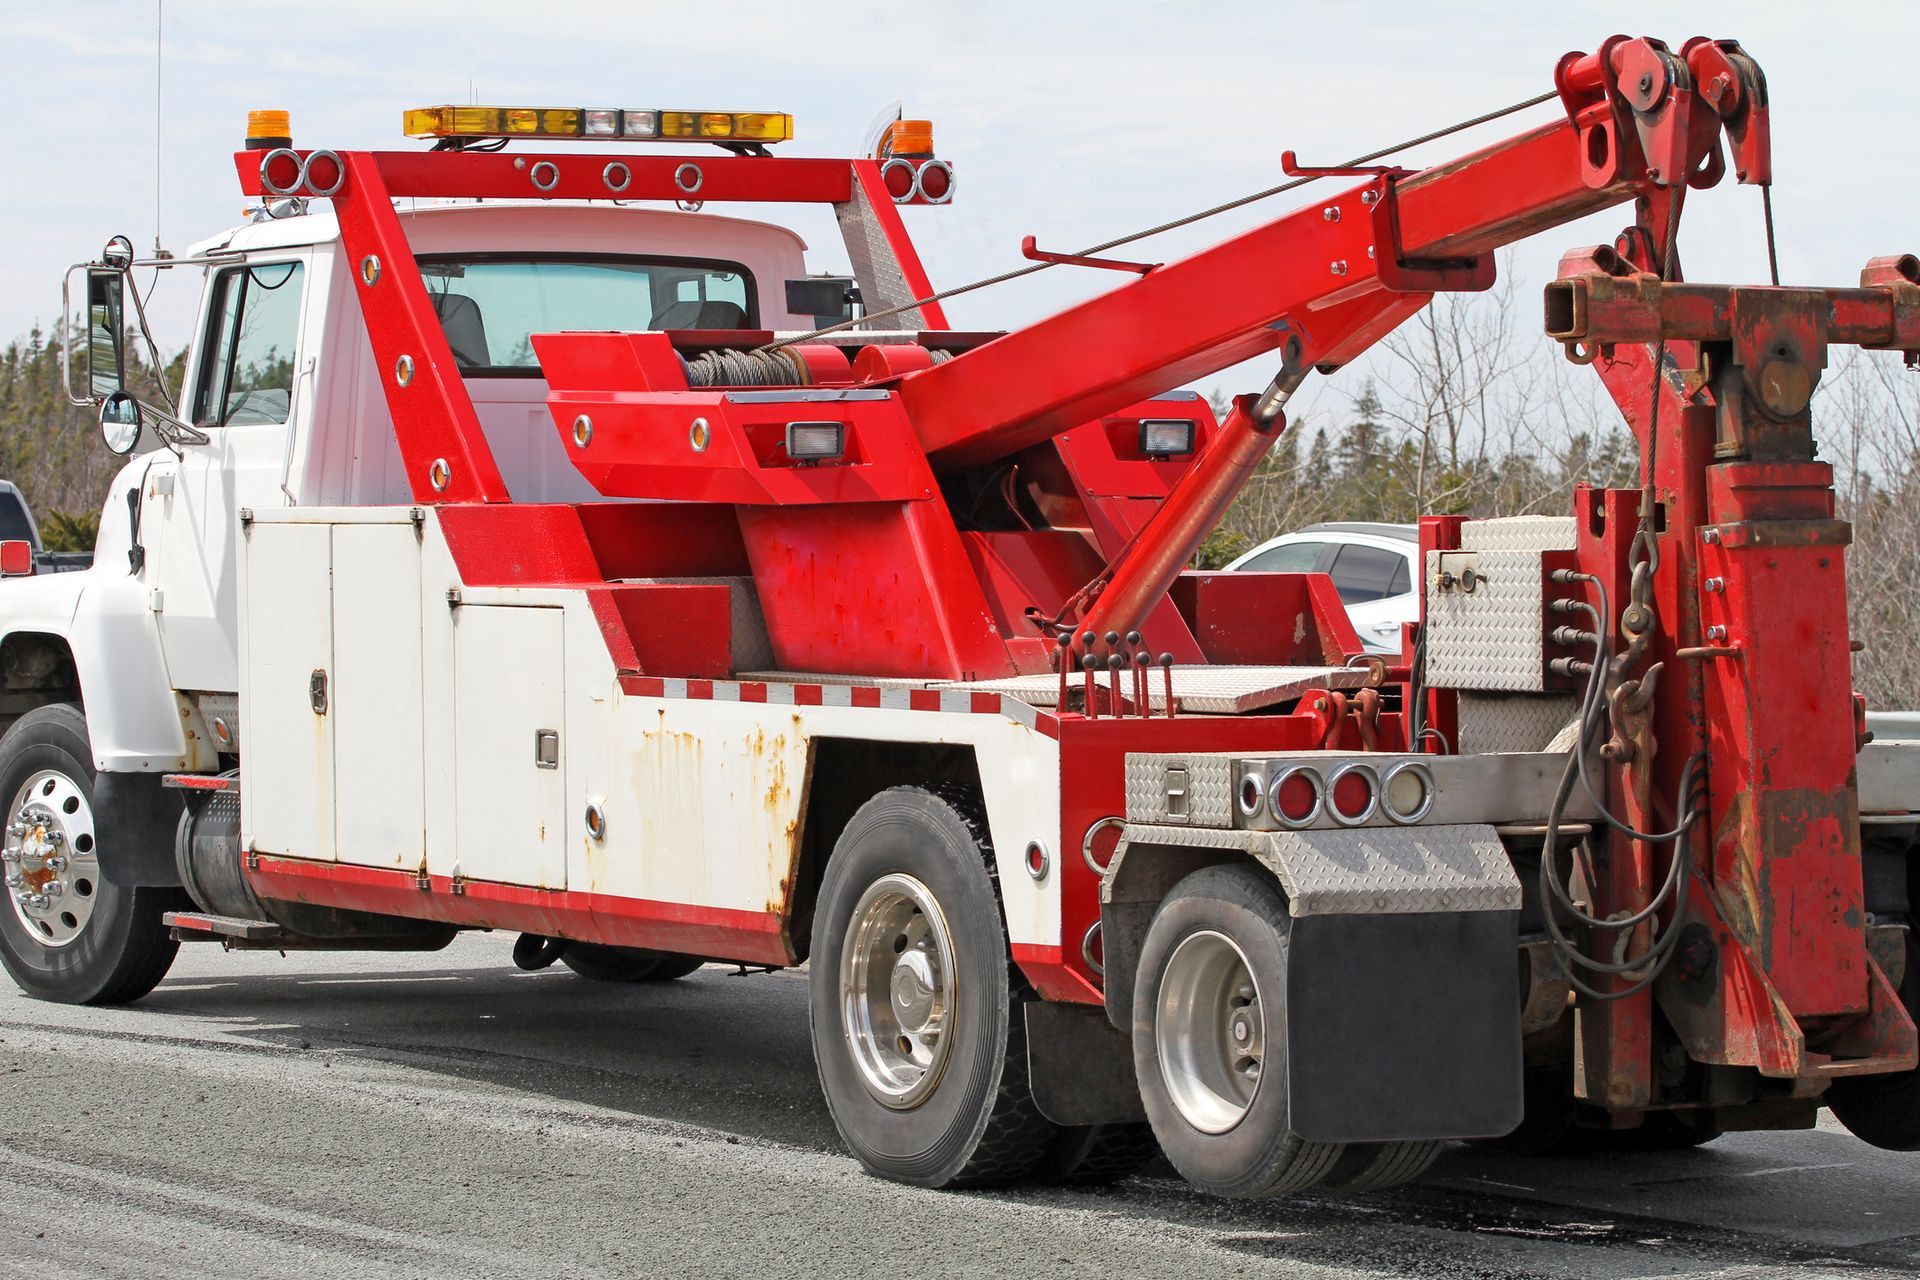 A Red And White Tow Truck Is Parked On The Side Of The Road - Sanford, NC - Landmark Towing of Sandford